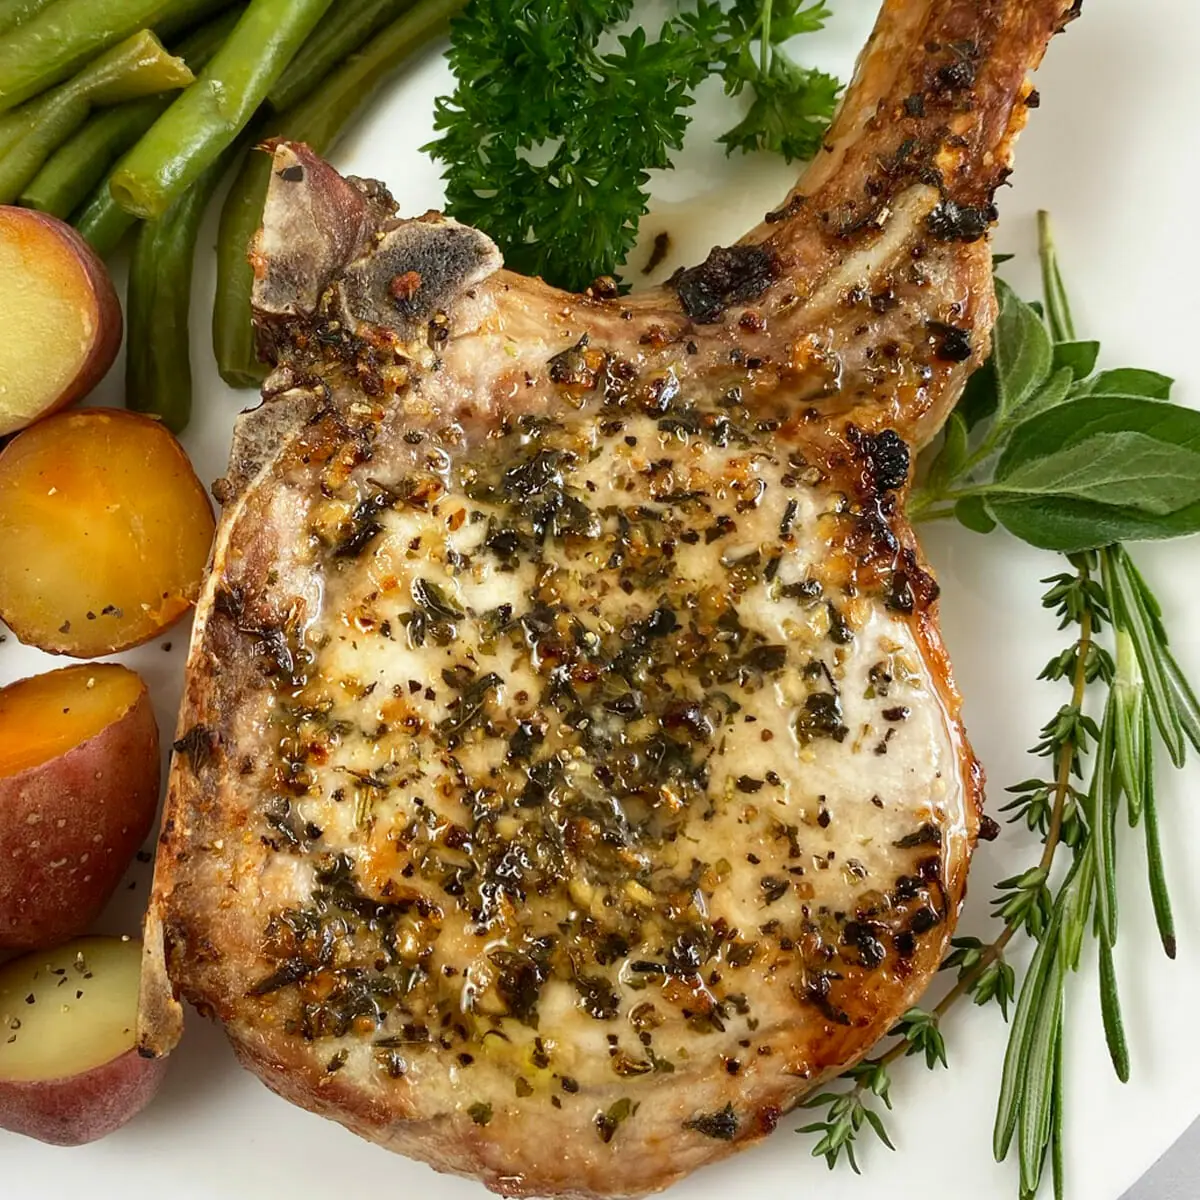 Recipe for thick and juicy, garlic and herb air fryer pork chops.